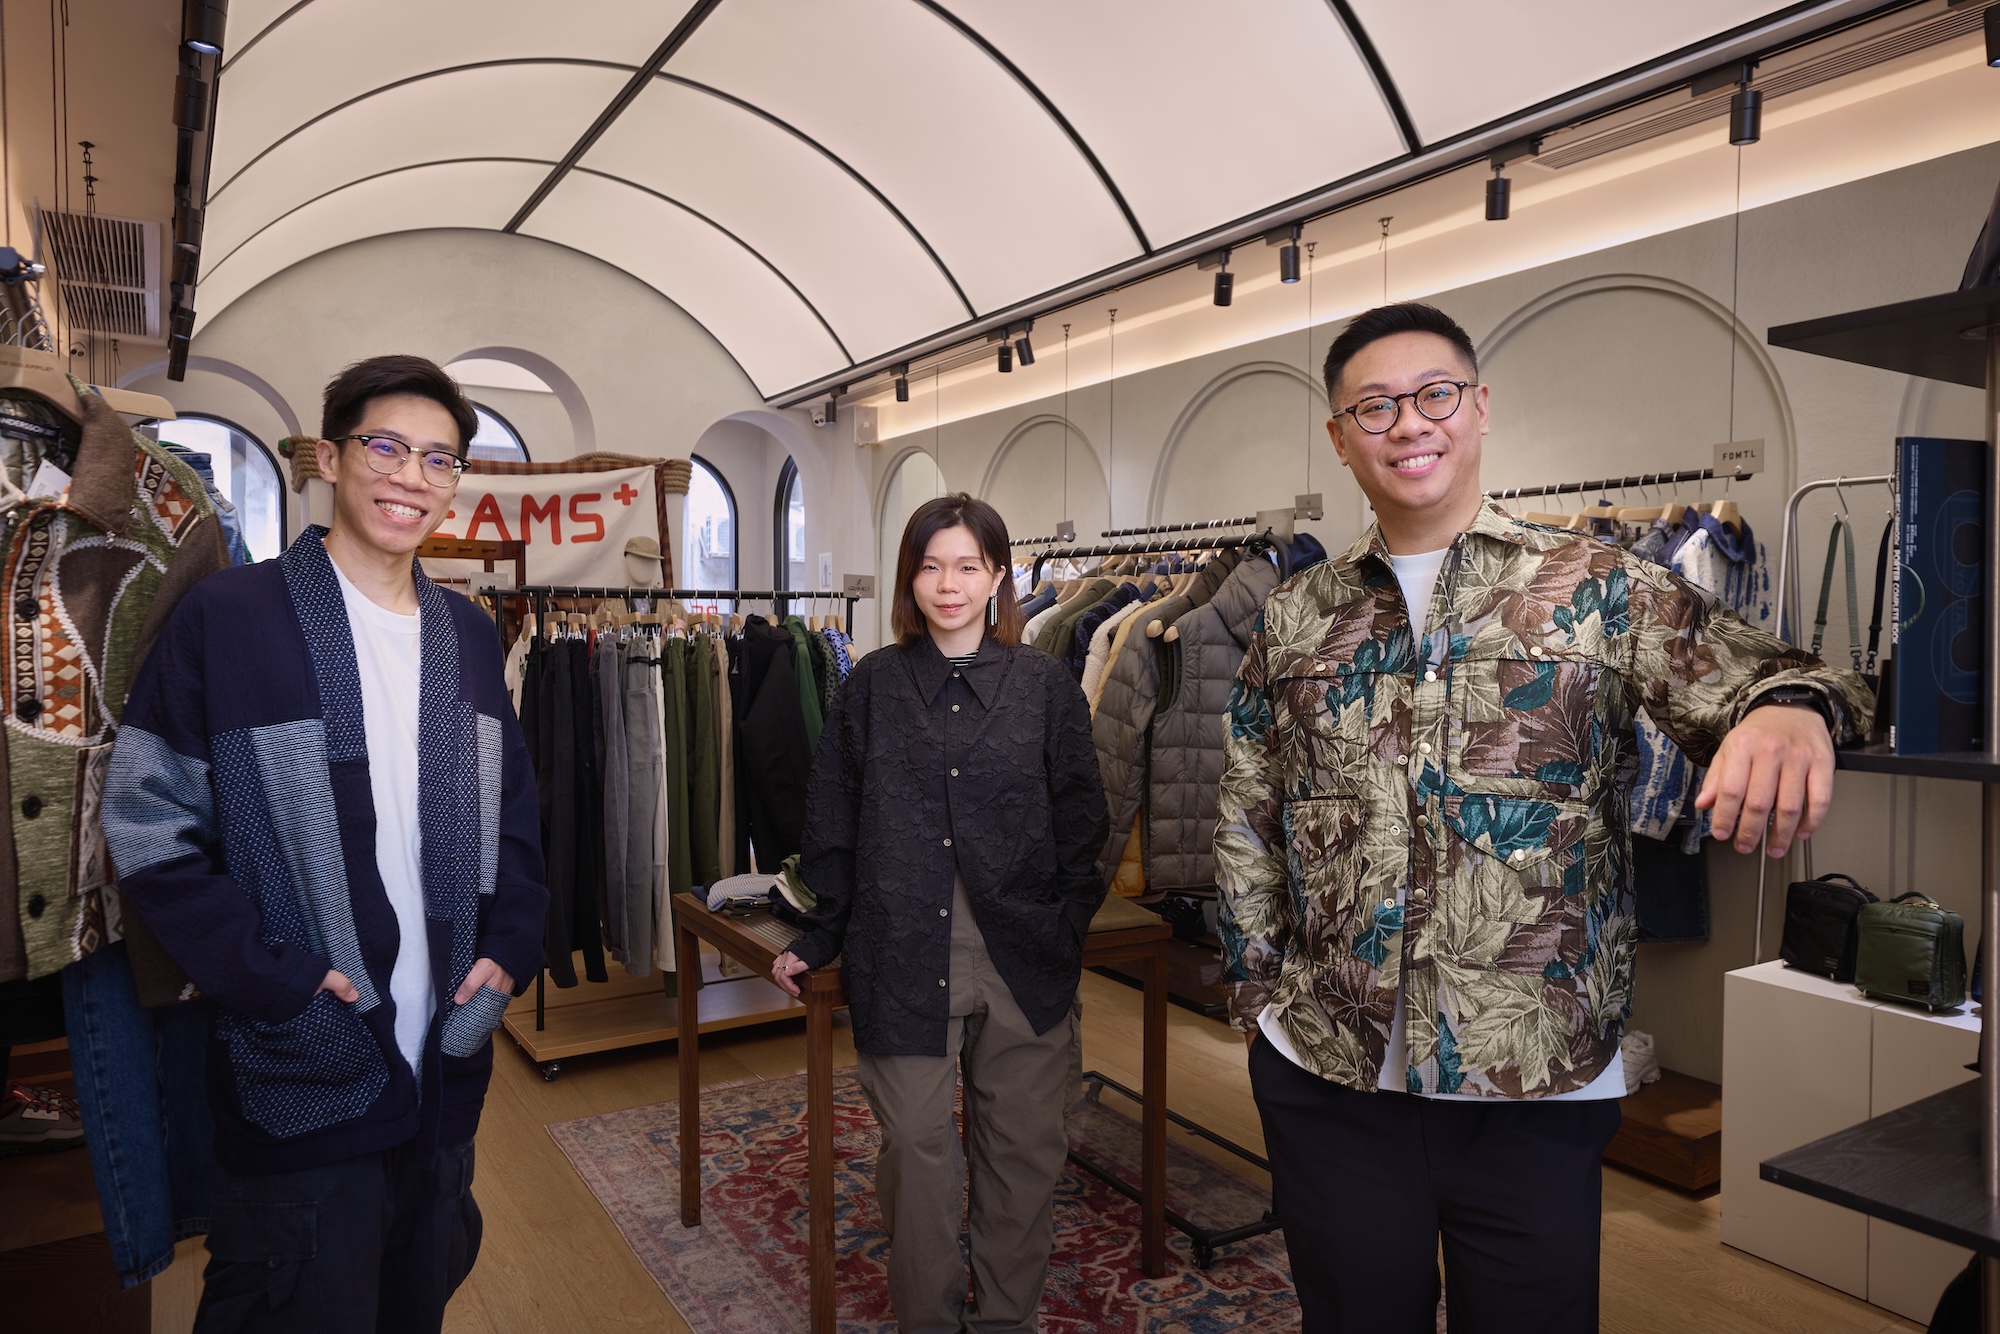 The Big Apple is home to an obsessively curated selection of brands and designers, with its founders (left to right) Jeff Tang, Pinky Hong and Billy Kuok often travelling to hunt for the latest trends streetwear trends